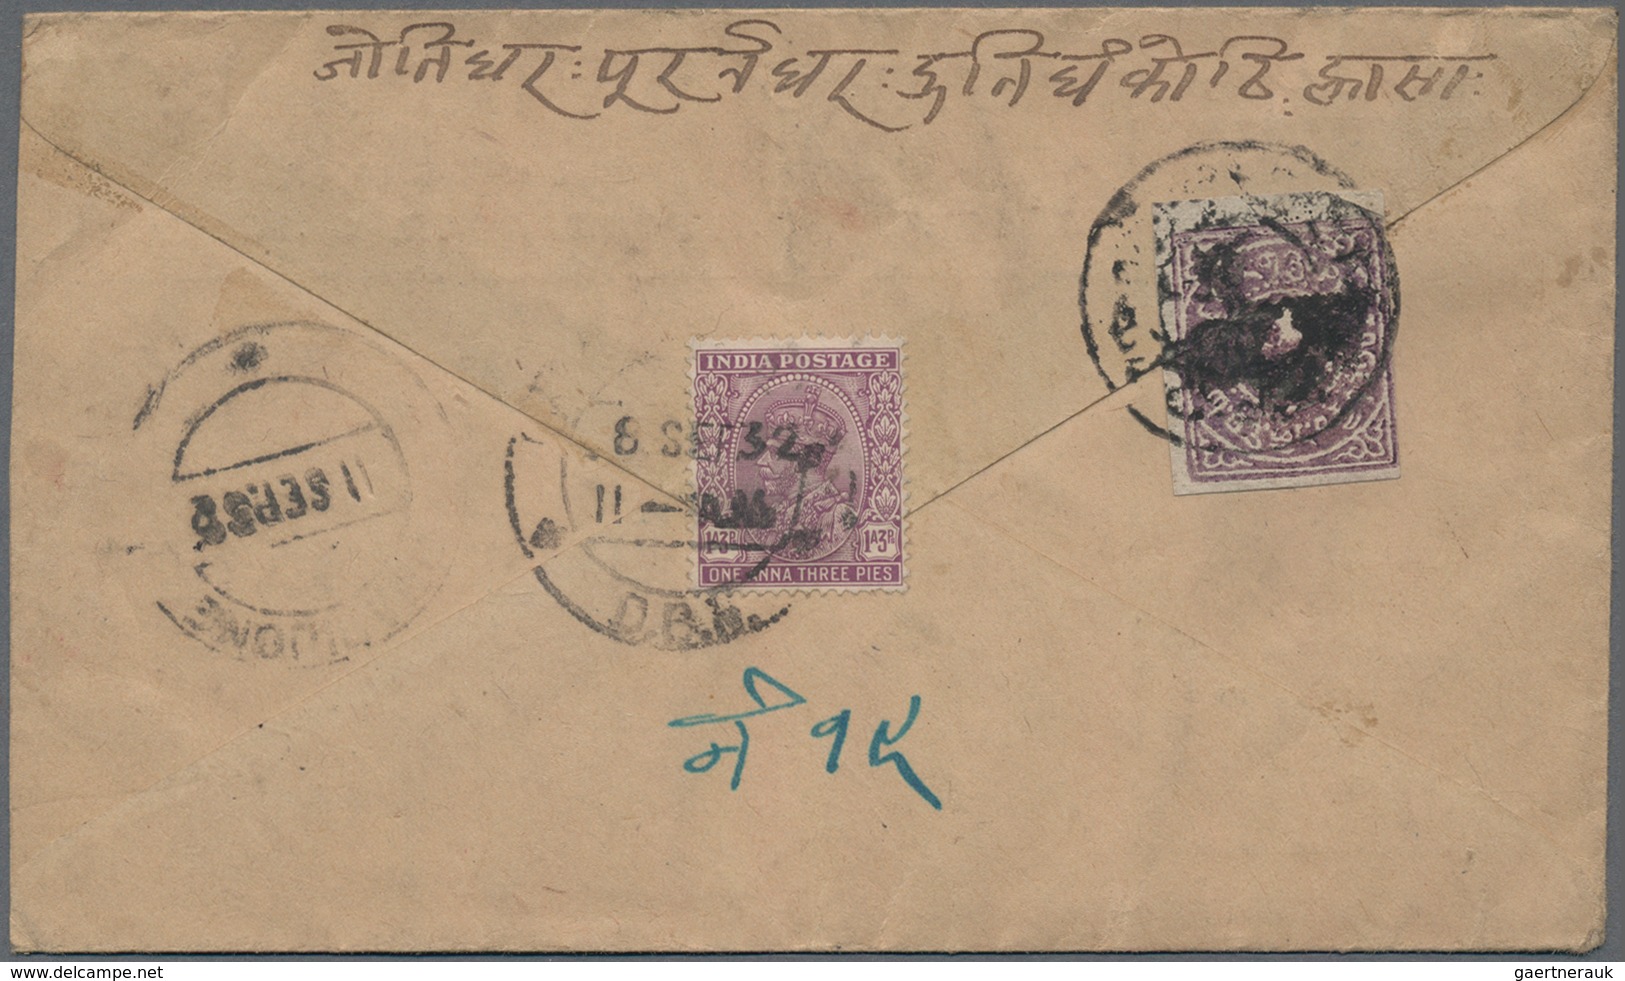 Tibet: 1912, 1 T. Greyish Violet Tied Indistinct "PHARI" To Inbound Cover From India, KGV 1 A 3. P. - Asia (Other)